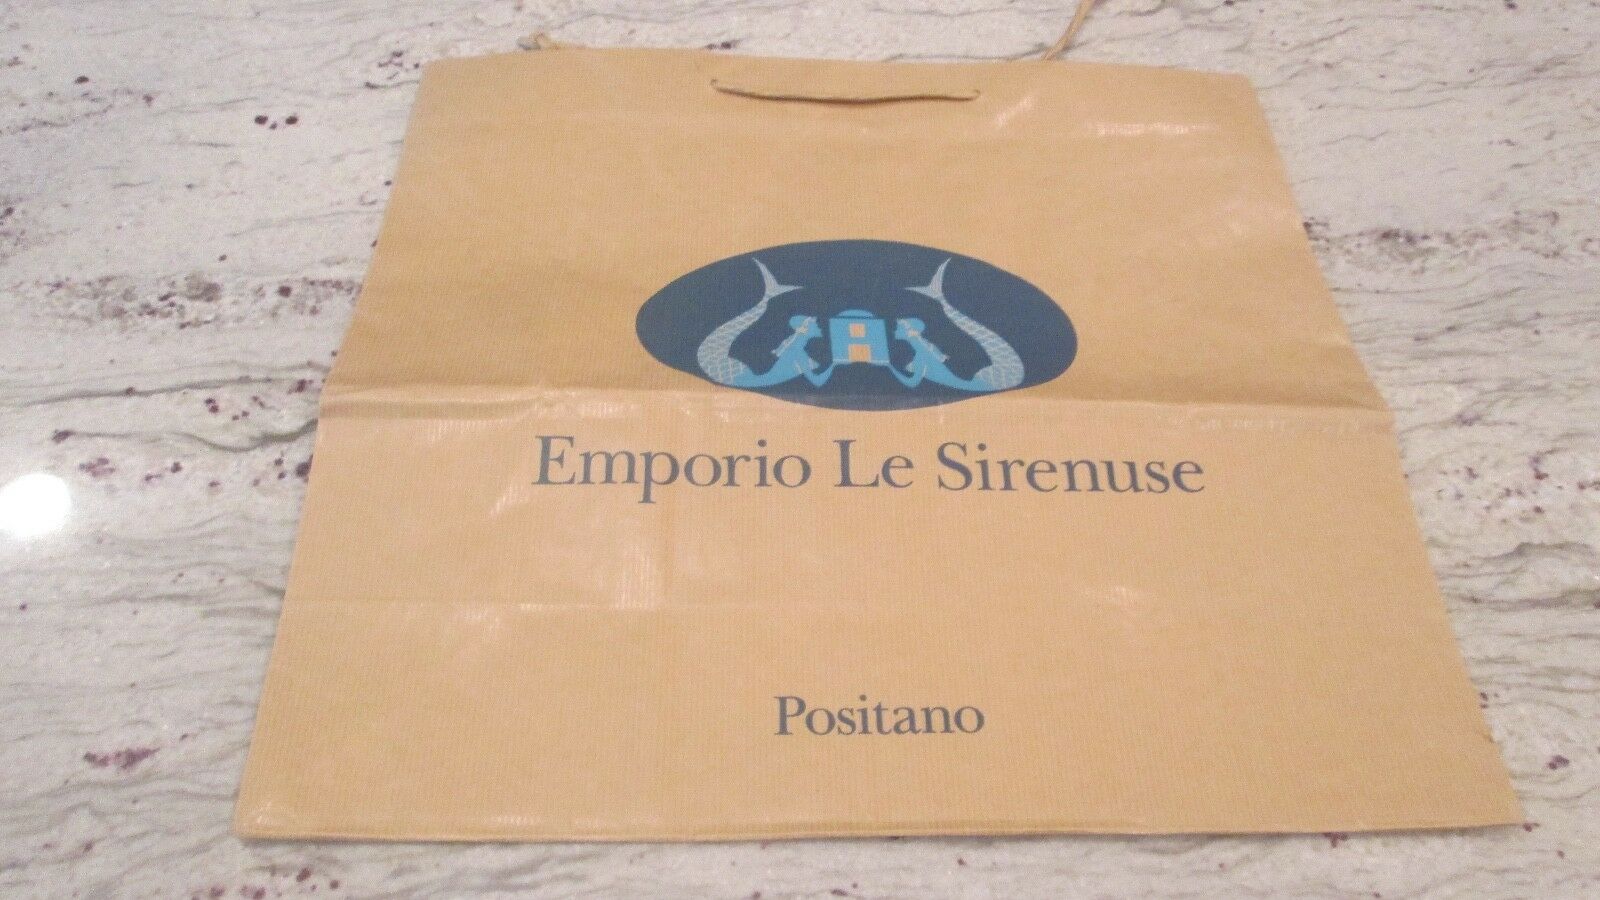 New-le Sirenuse In Positano,italy Emporio Gift Bag-2 Sided Size 17x18"'hardpaper